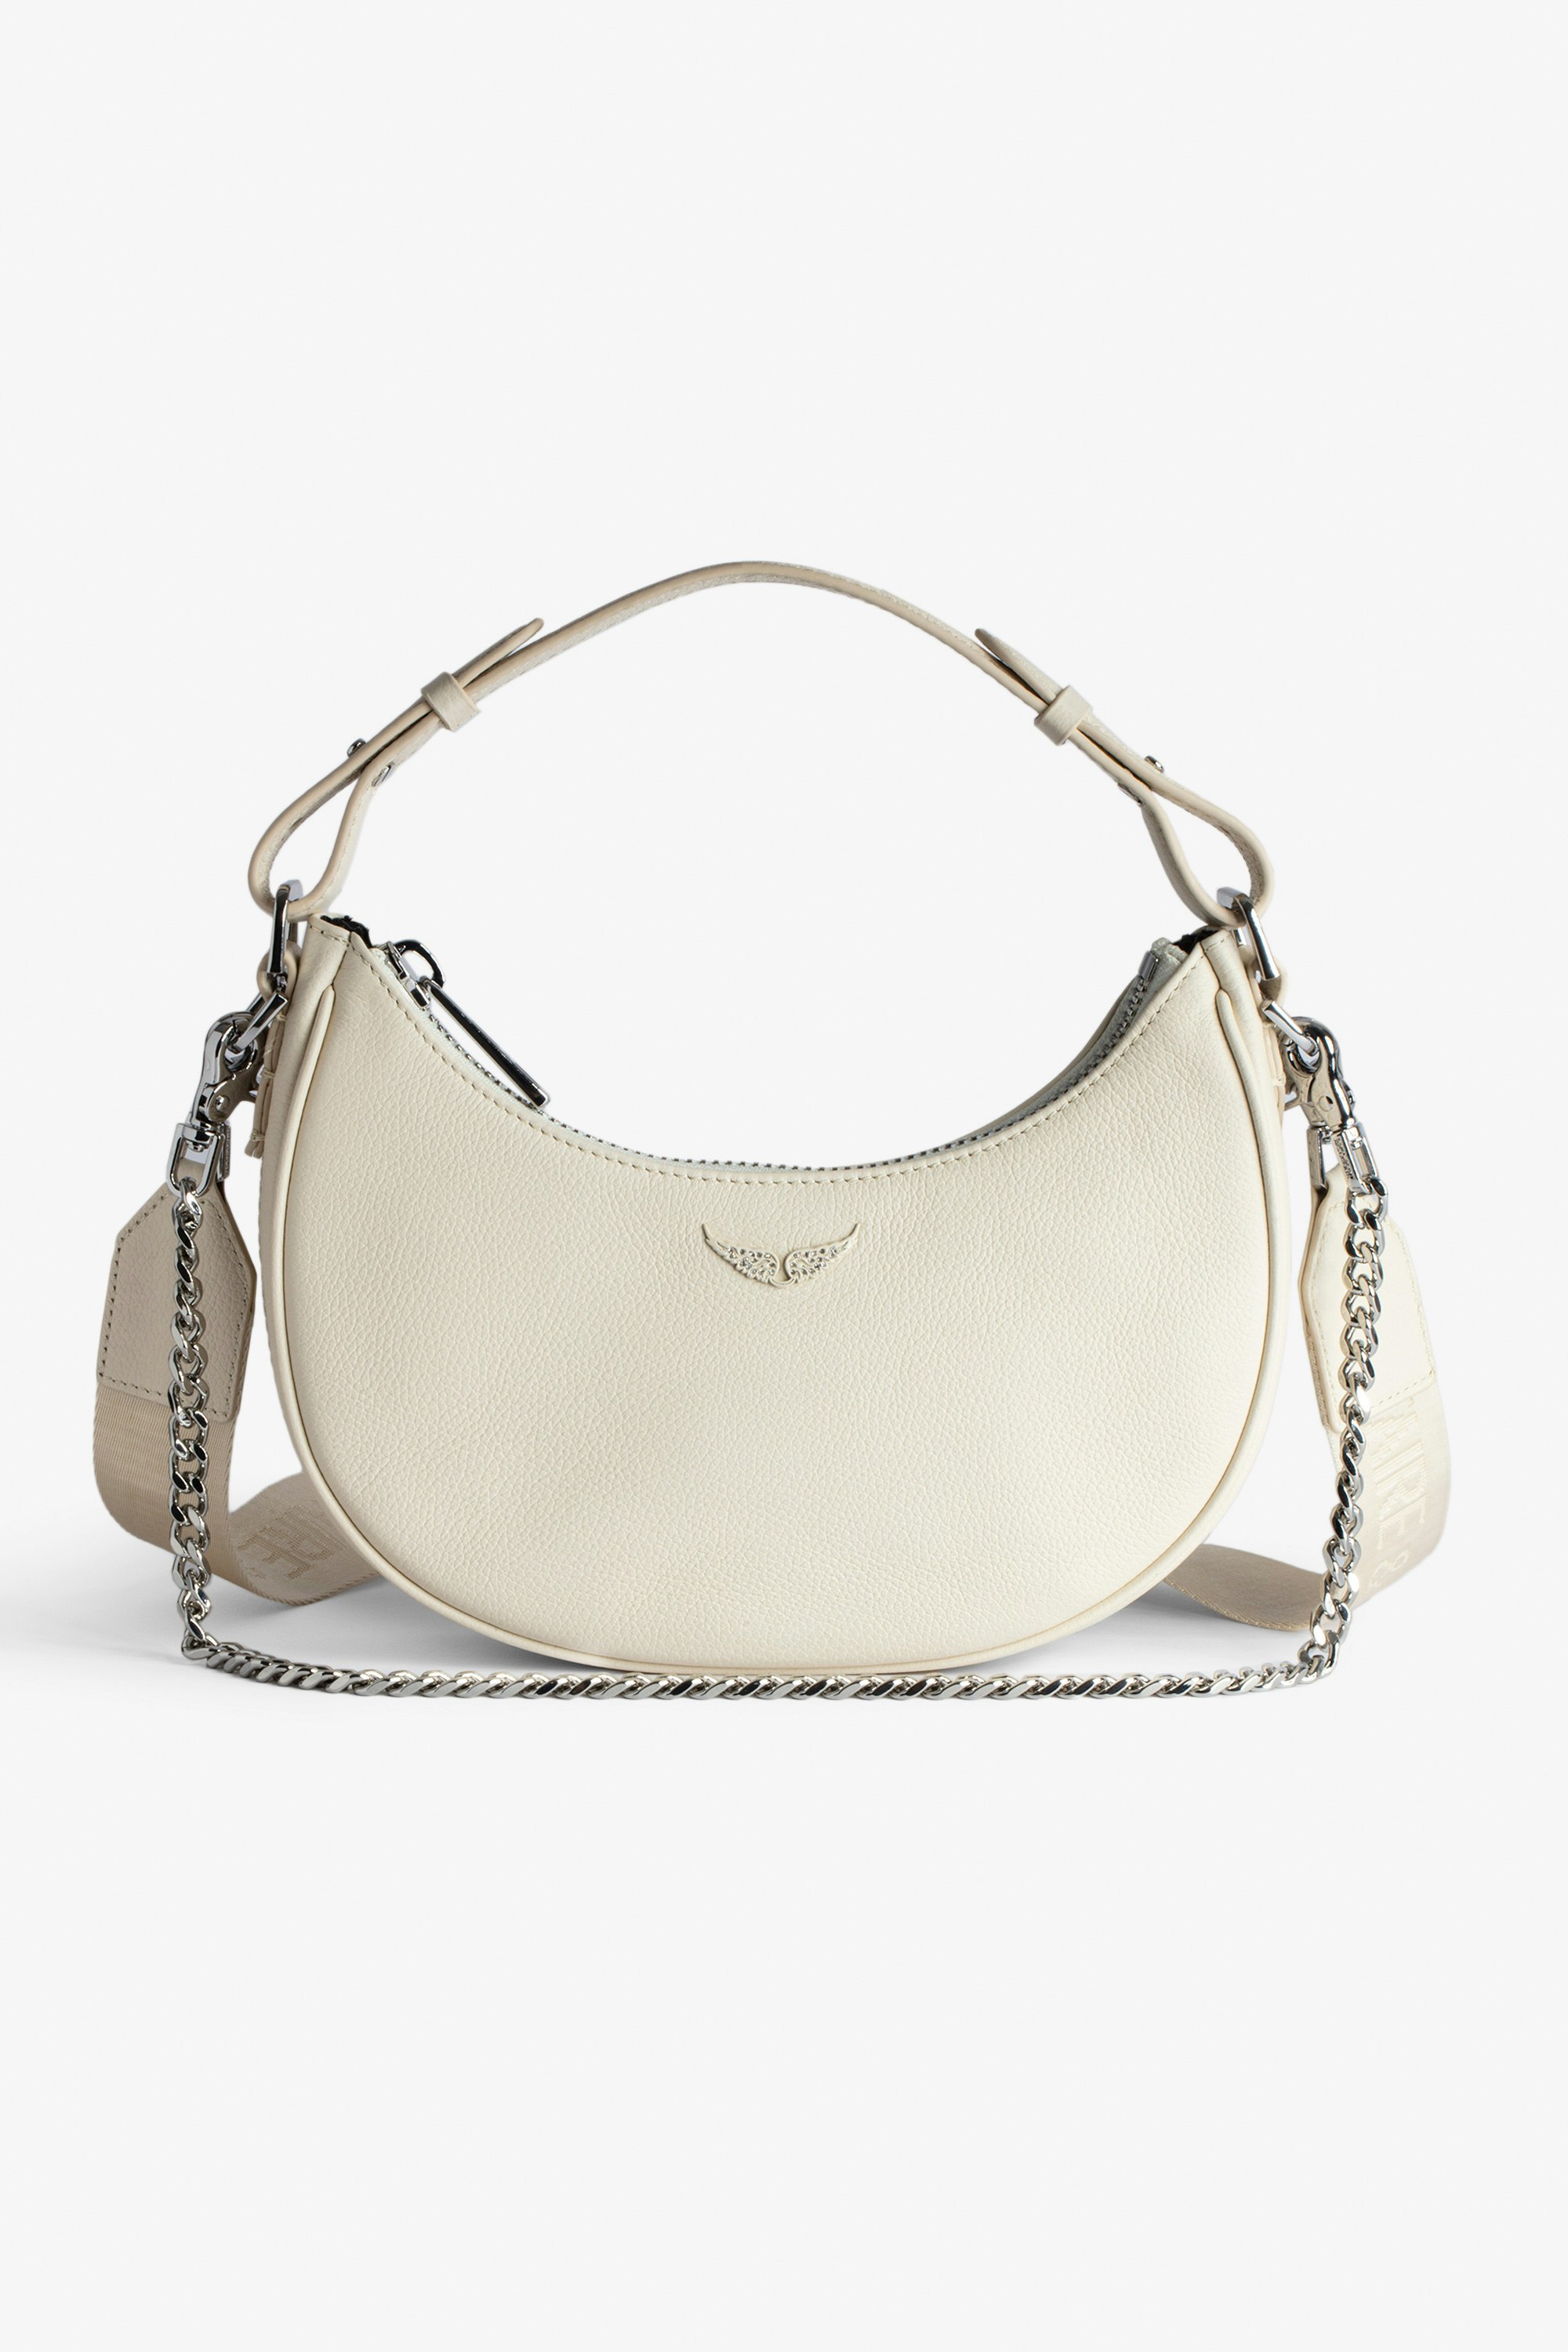 Moonrock Bag - Women’s half-moon bag in ecru grained leather with a short handle, shoulder strap, chain and signature wings.